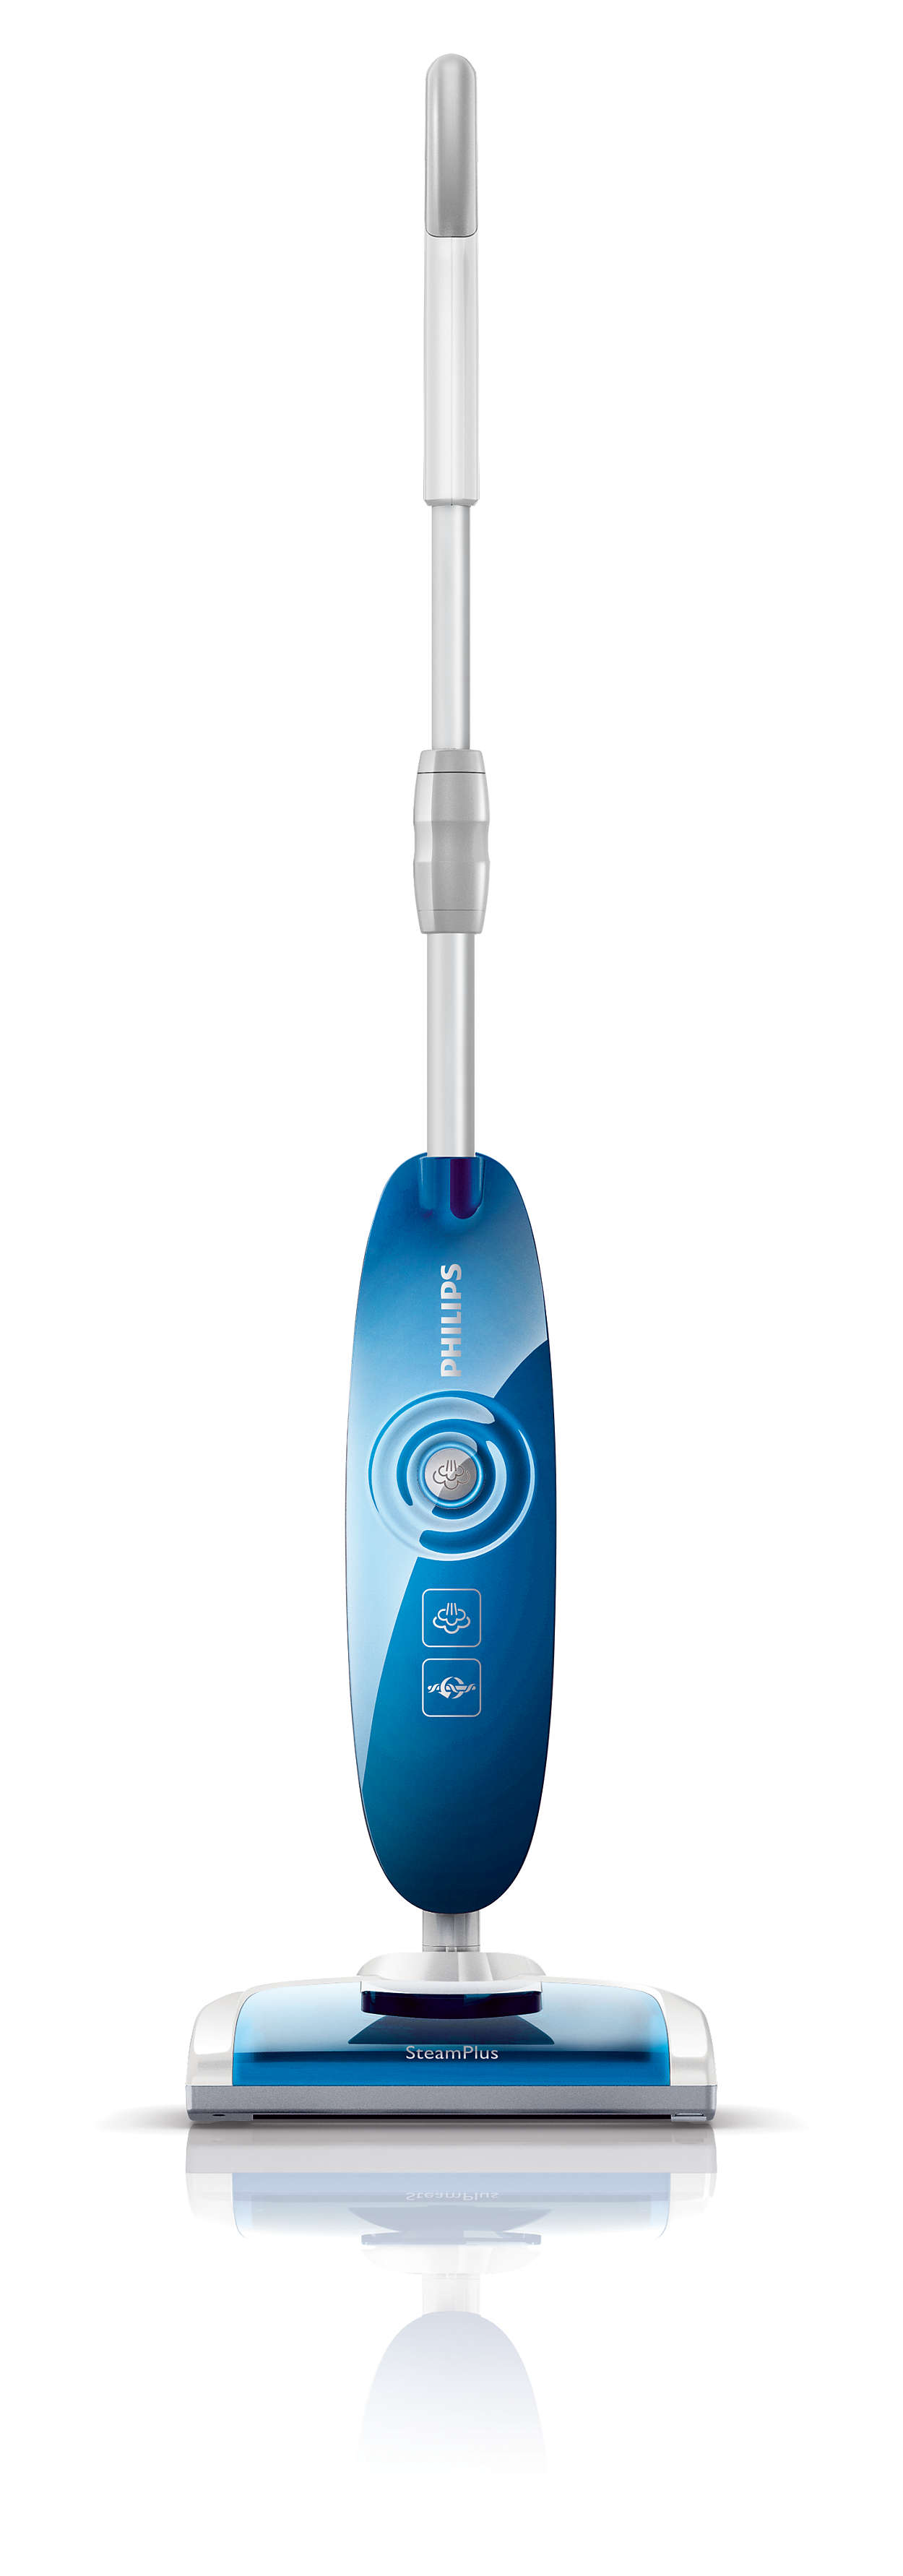 Grudge Alternative engineering Steam Plus Sweep and Steam Cleaner FC7020/01 | Philips